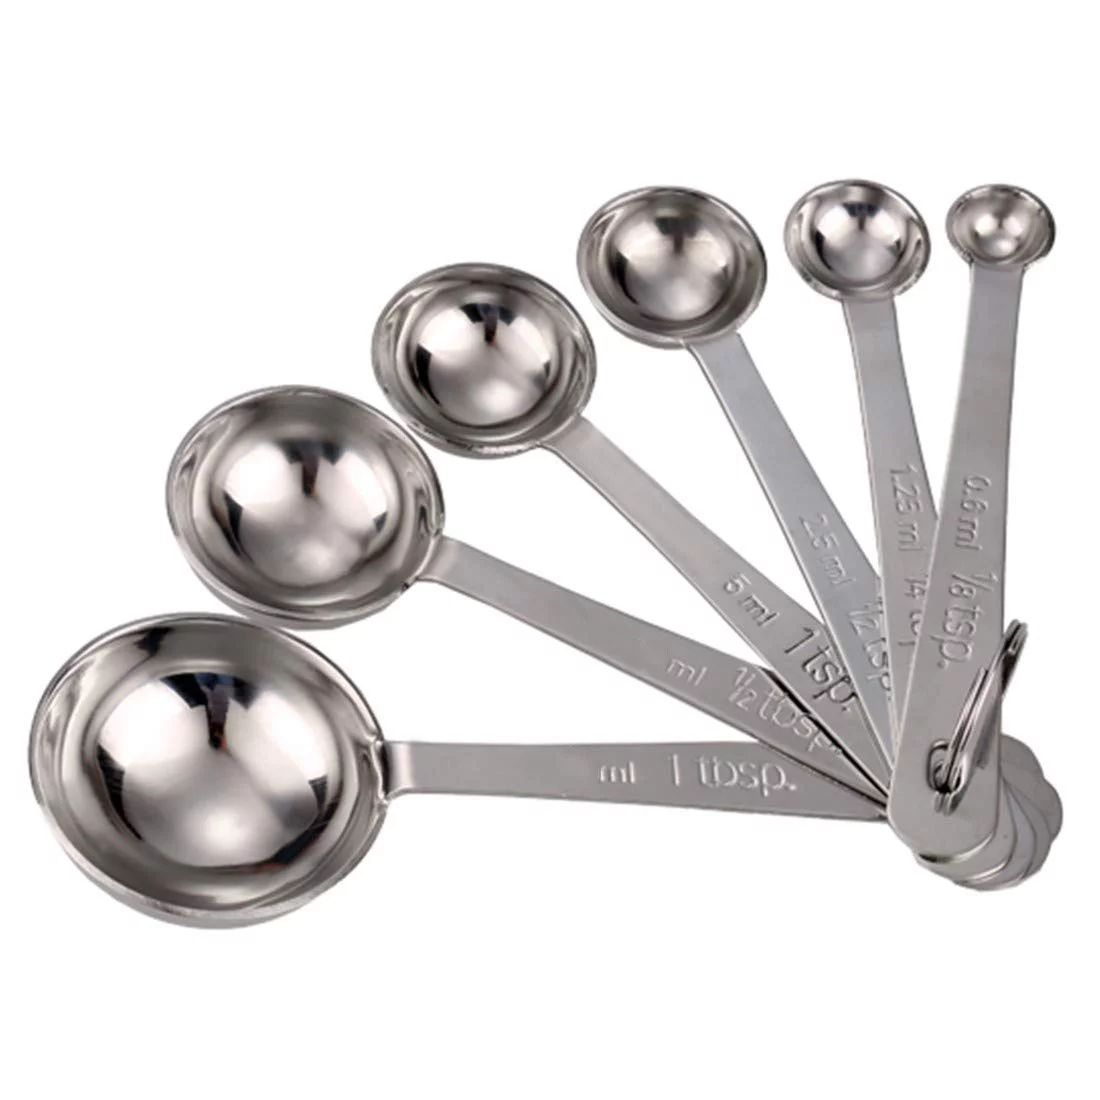 Heavy Duty Stainless Steel Metal Measuring Spoons for Dry or Liquid Commercial Grade Quality | Walmart (US)